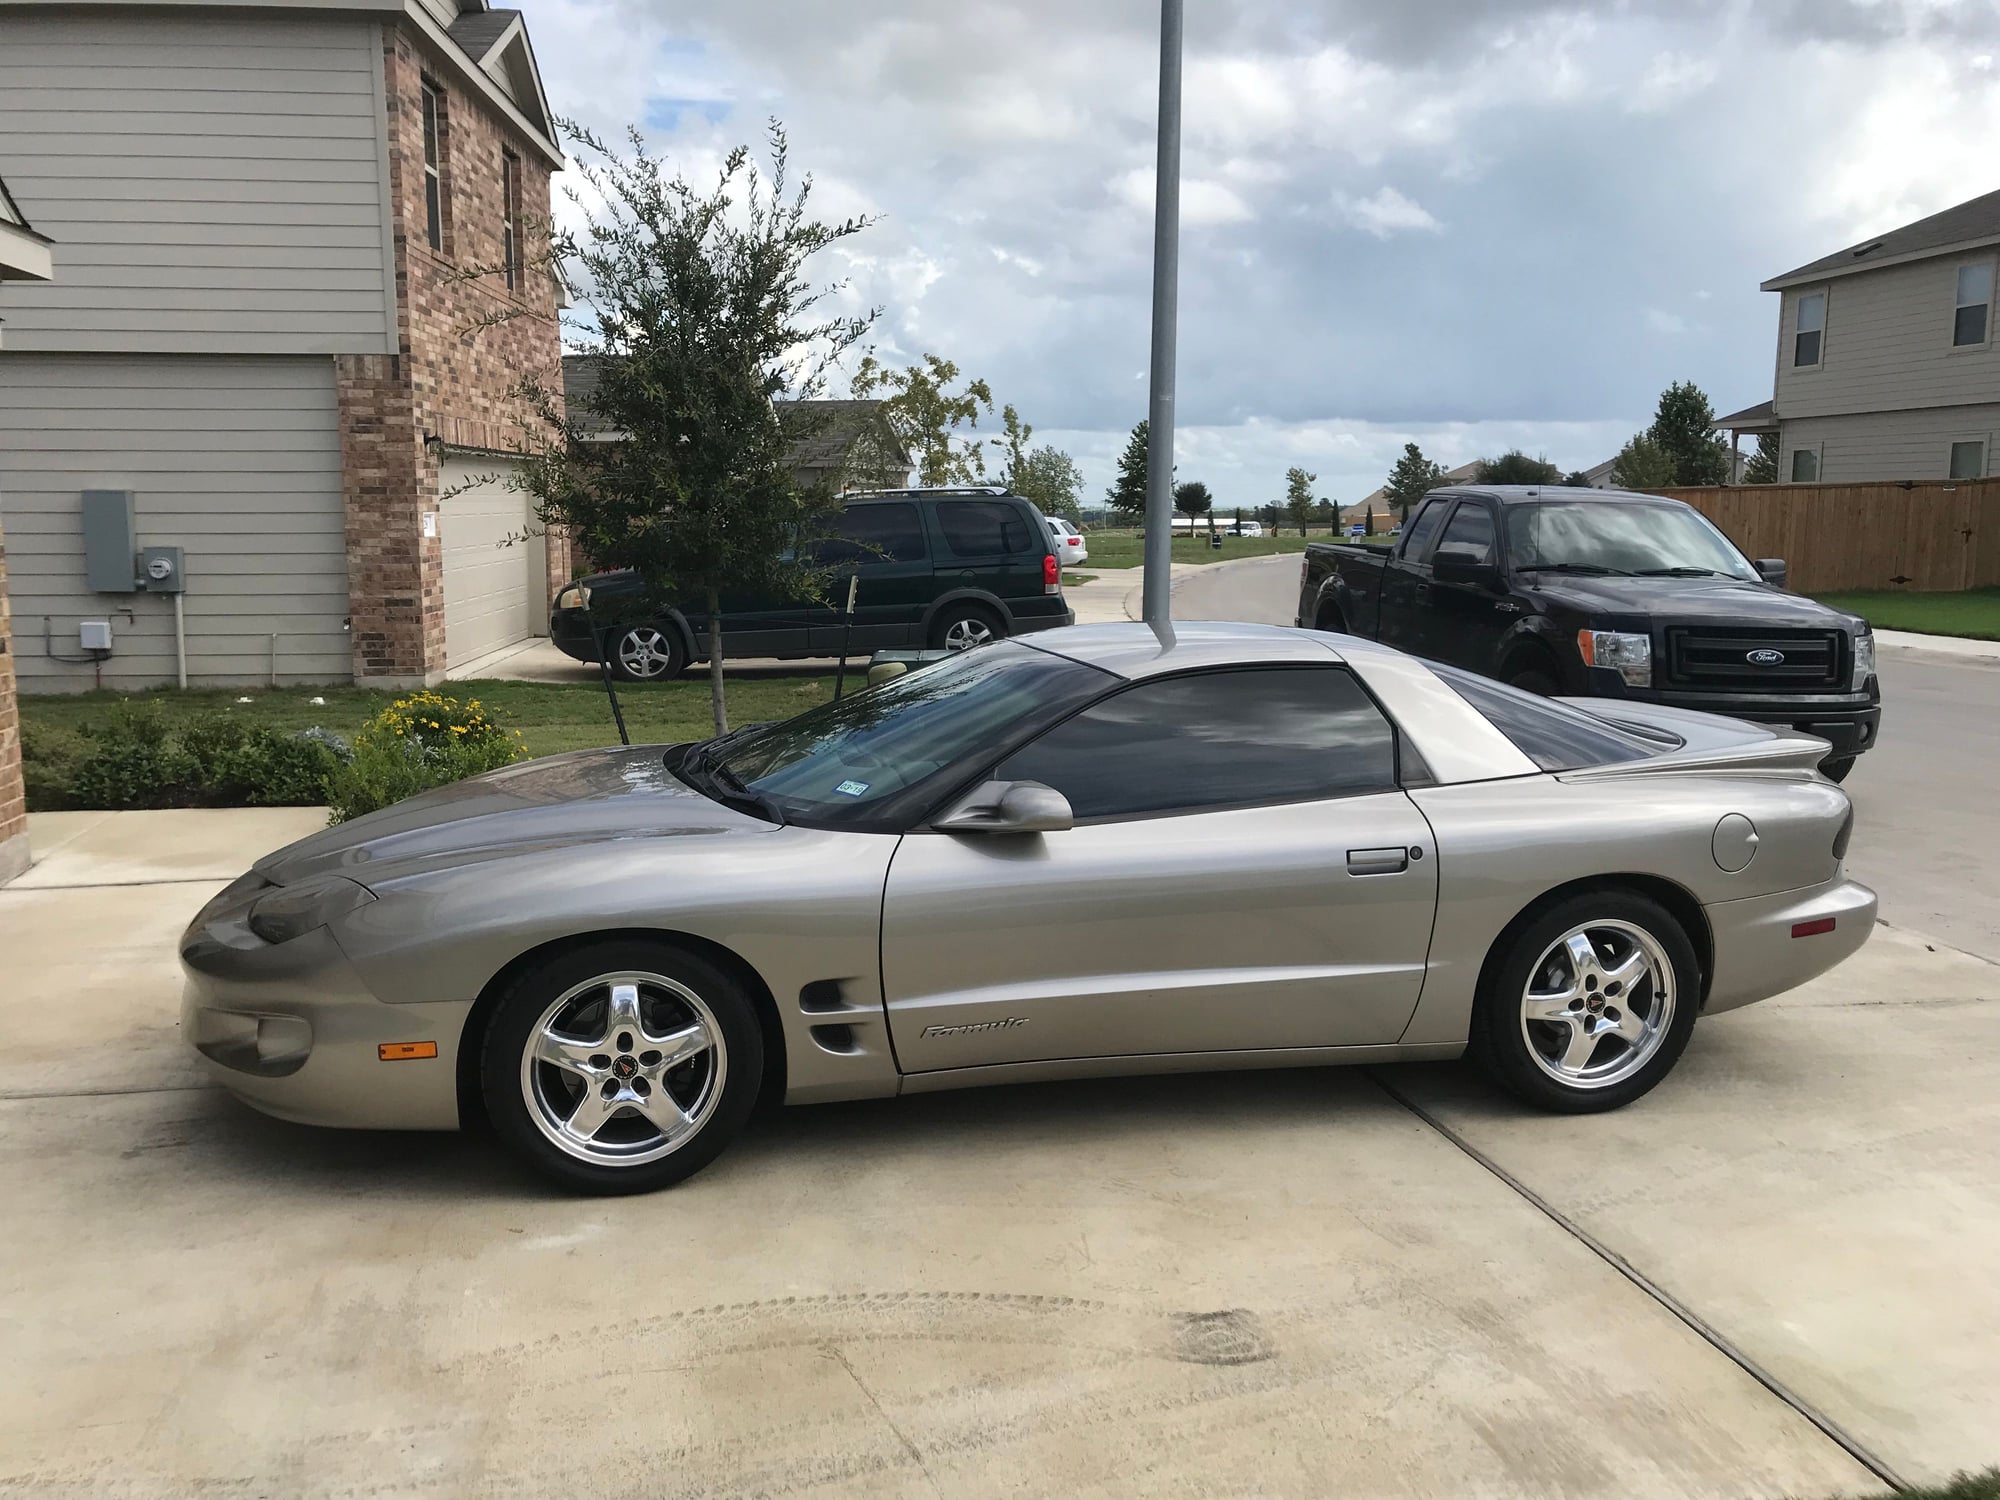 2000 Pontiac Firebird - 2000 Firebird Formula Hard Top - Used - VIN 2g2fv22g8y2152463 - 226,000 Miles - 8 cyl - 2WD - Manual - Coupe - Other - Jarrell, TX 76537, United States